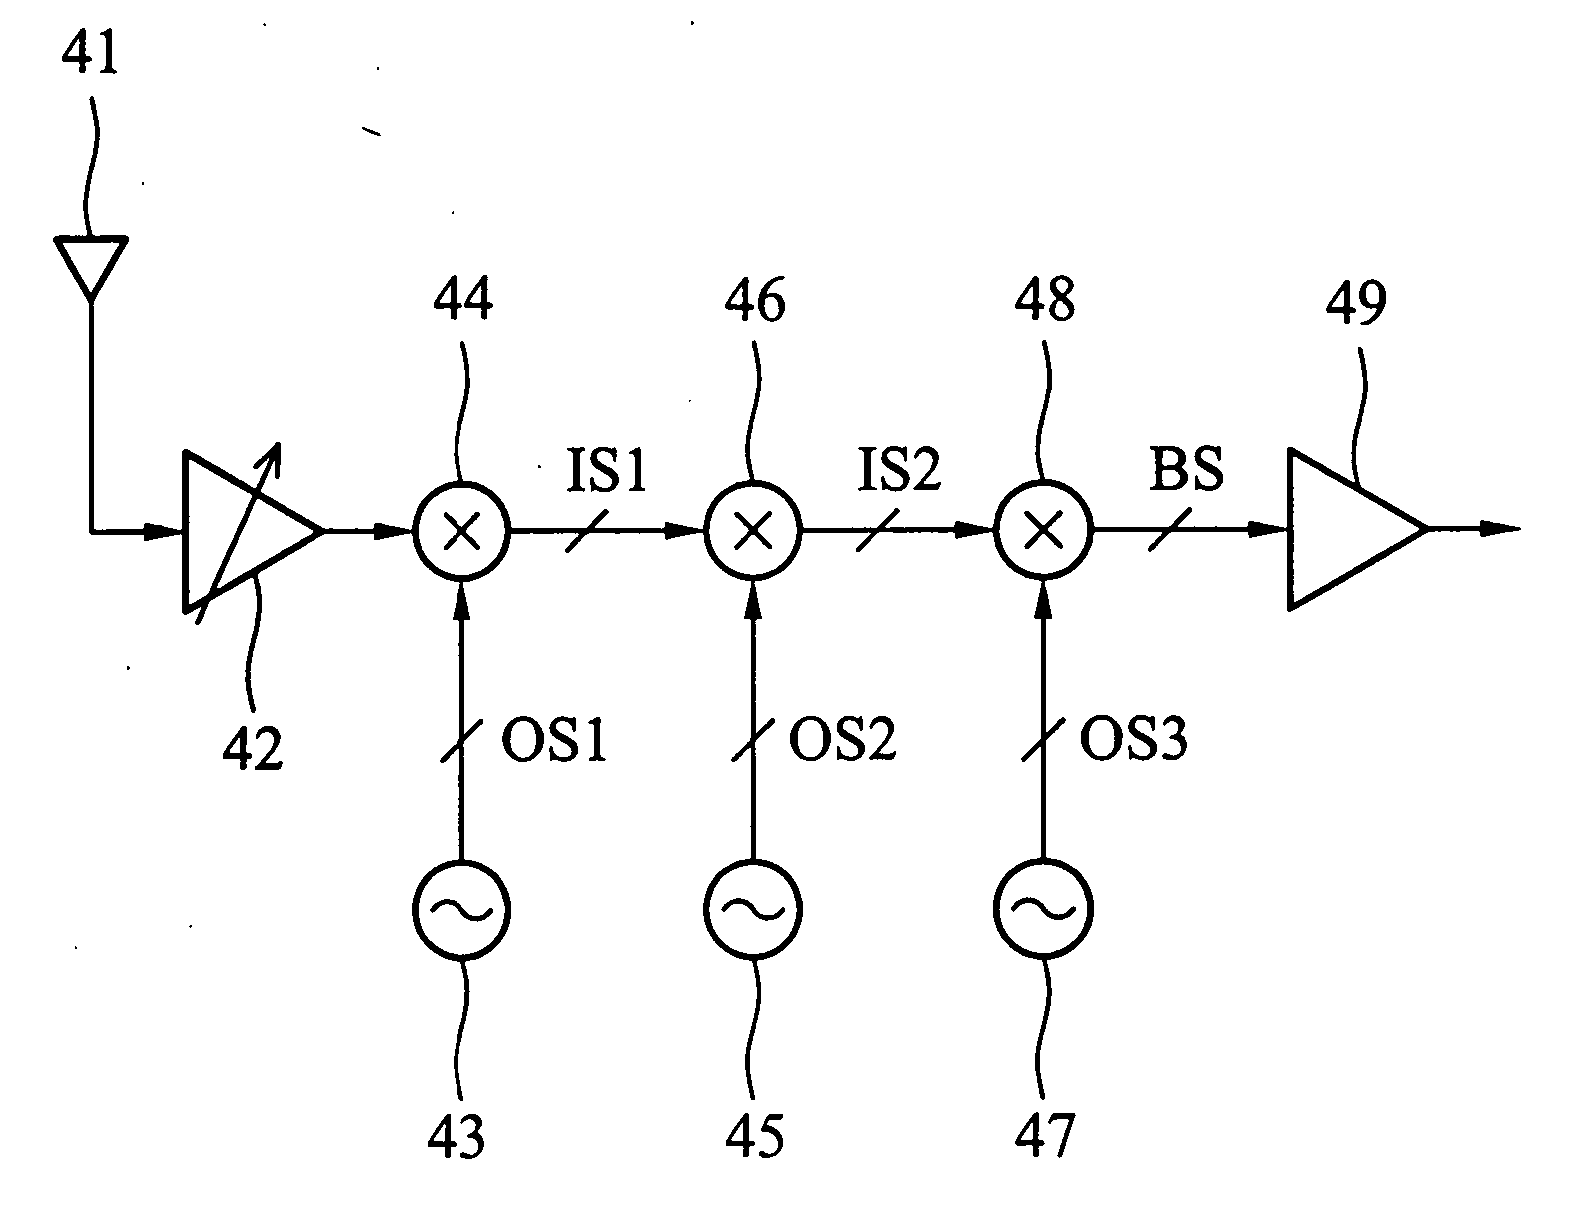 Frequency conversion in a receiver